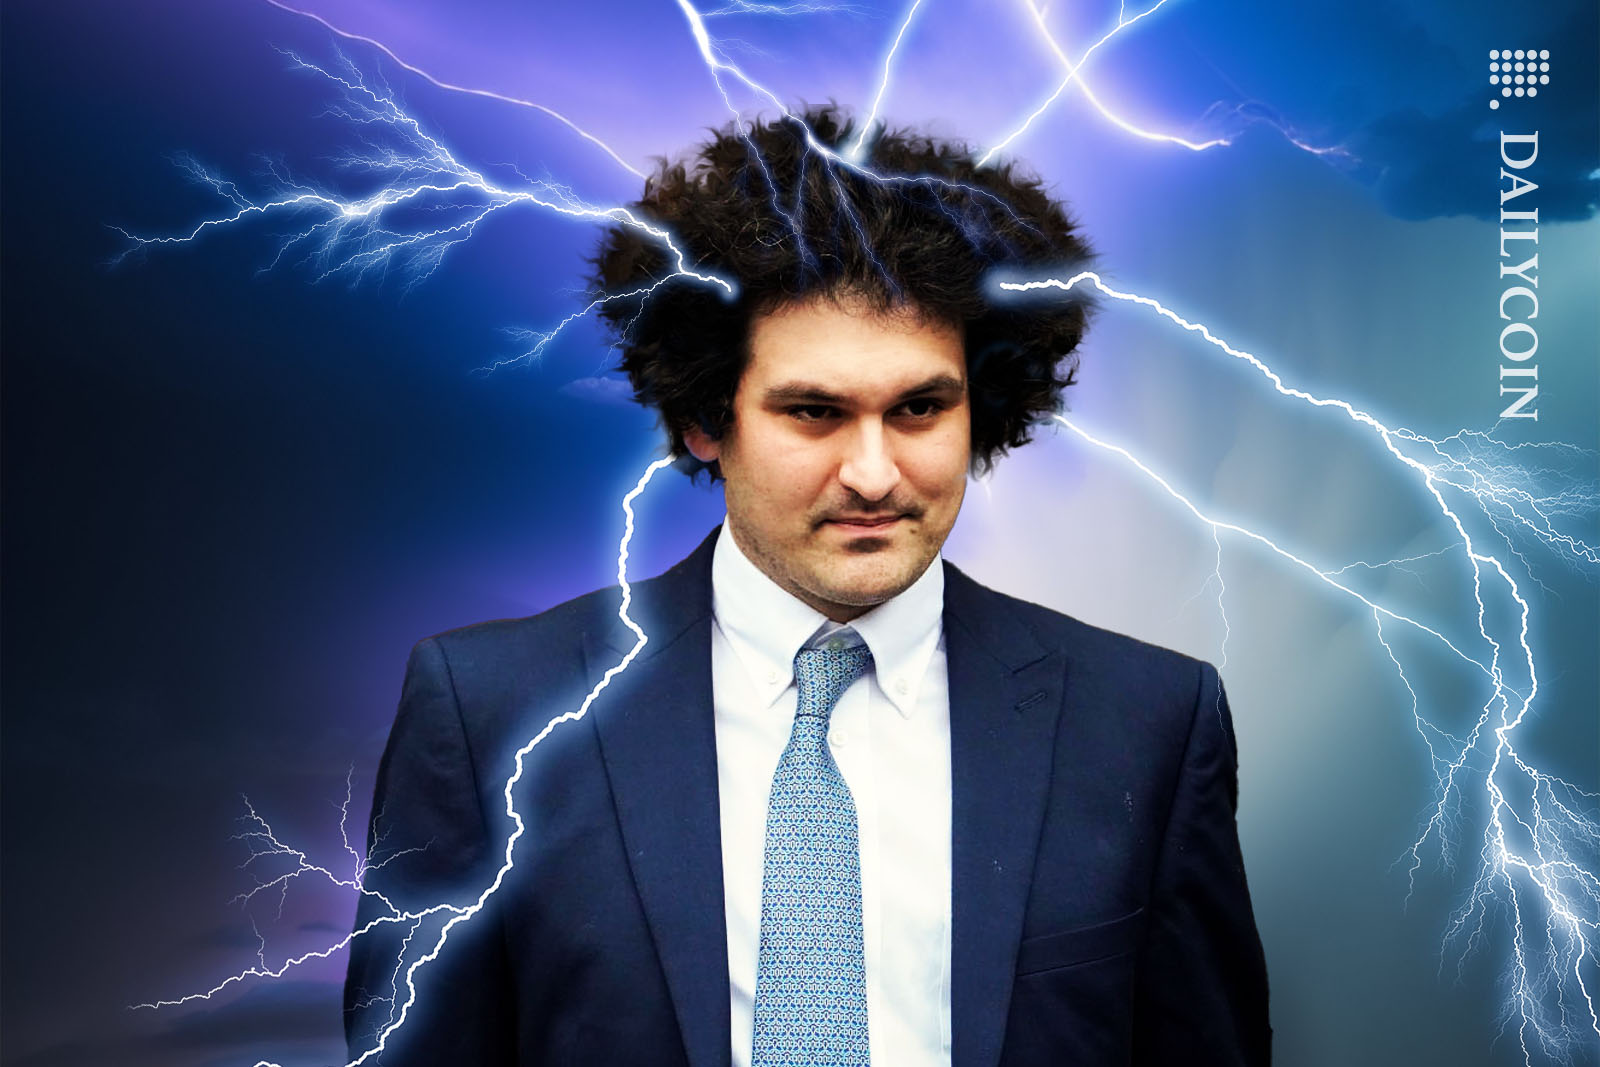 Sam Bankman-Fried Looking very angry with lightning strikes coming from his hair.